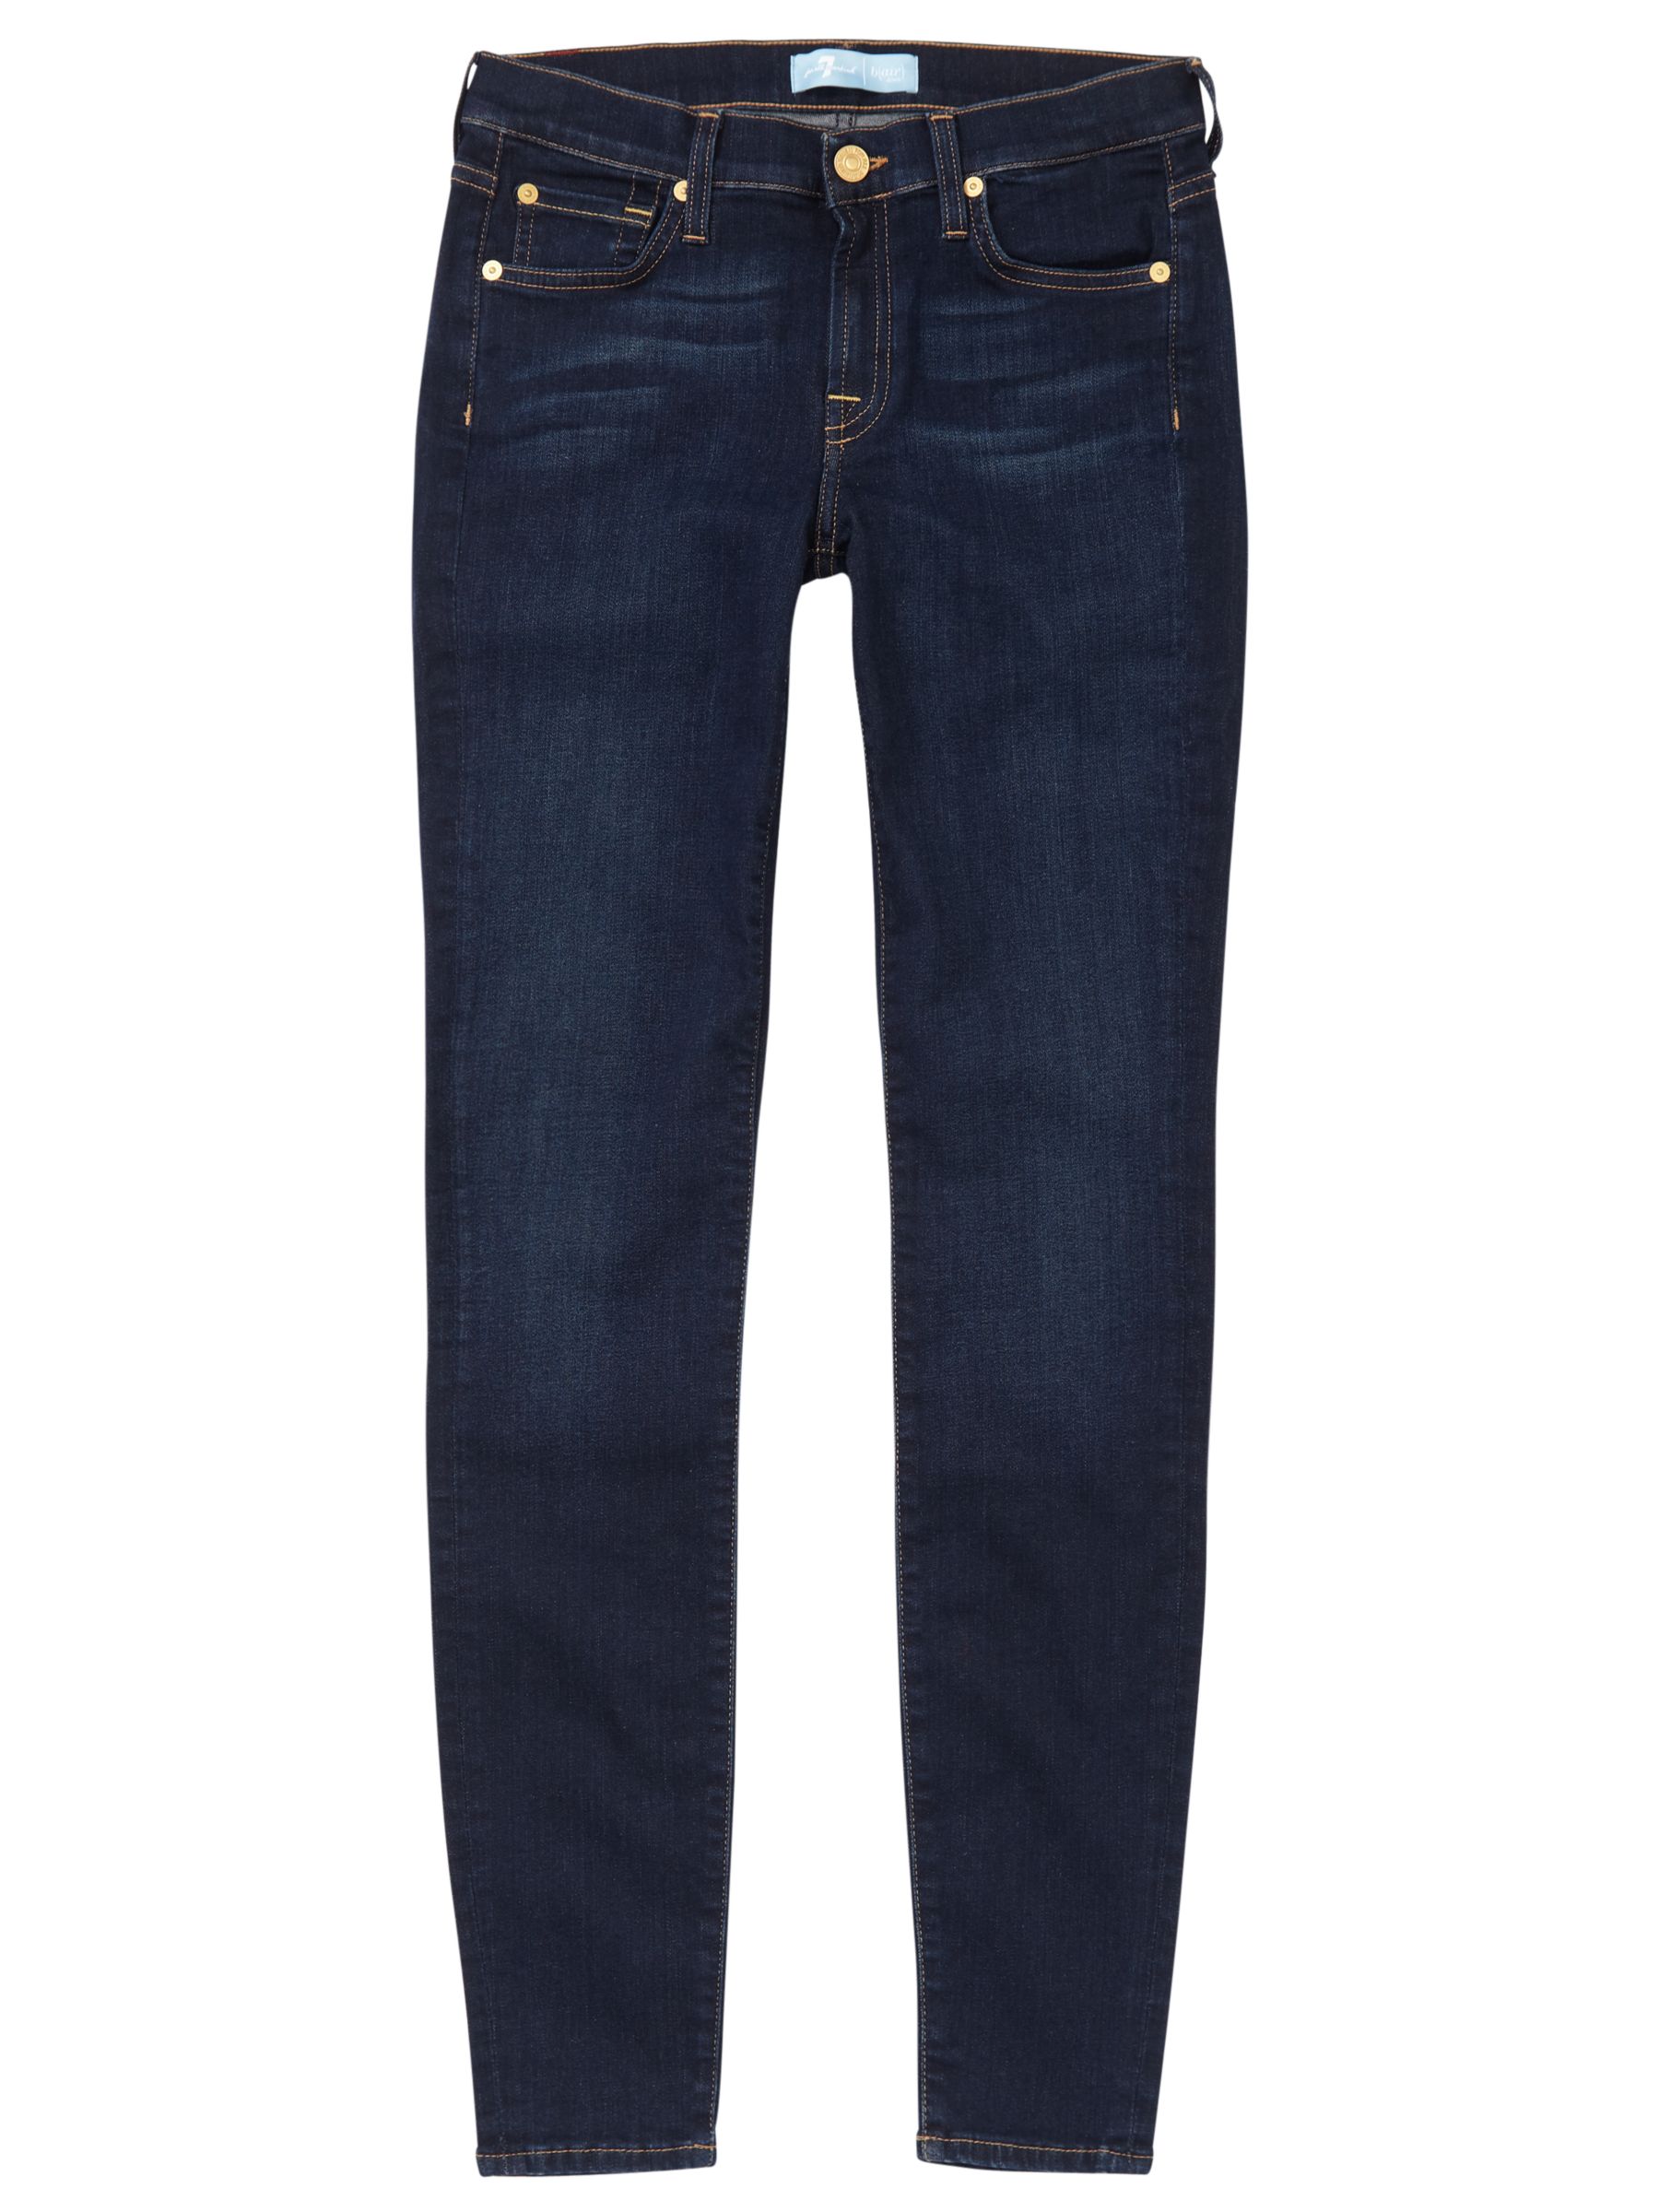 7 For All Mankind The Skinny B(air) Jeans, Rinsed Indigo, 24